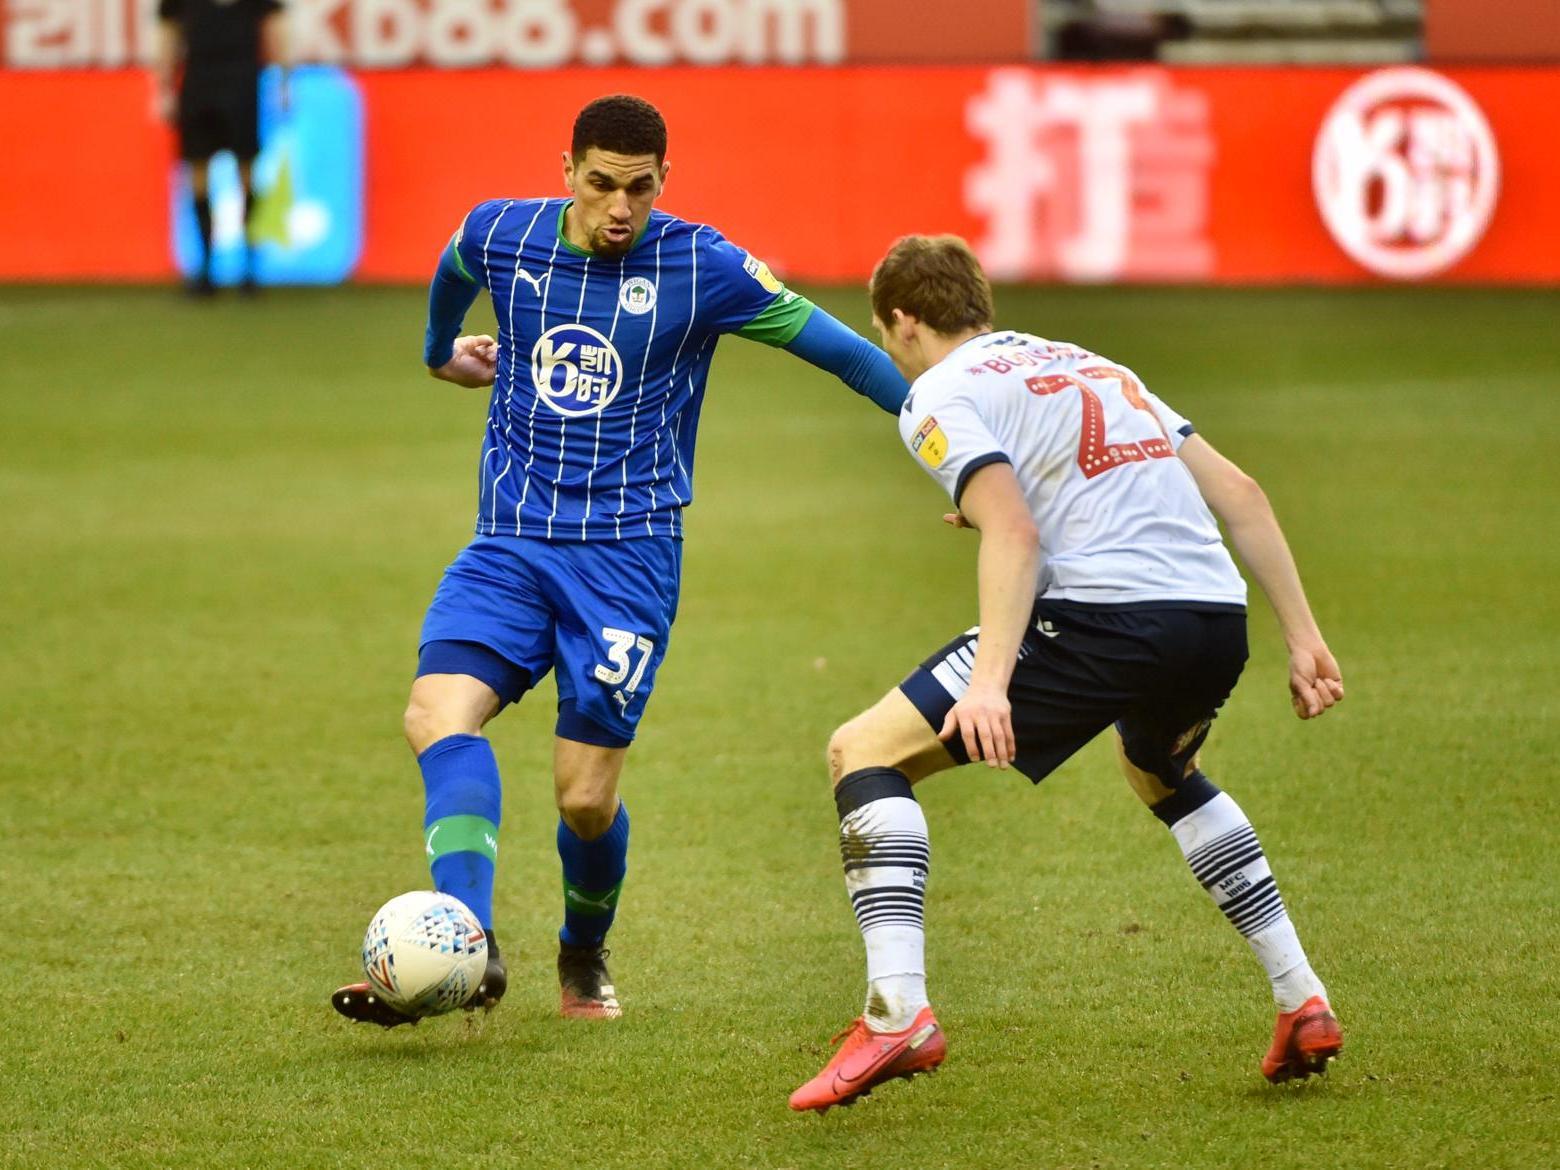 Leon Balogun: 8 - Could turn out to be the signing of the season, incredible to think he hadn't played in the league for over a year before last week